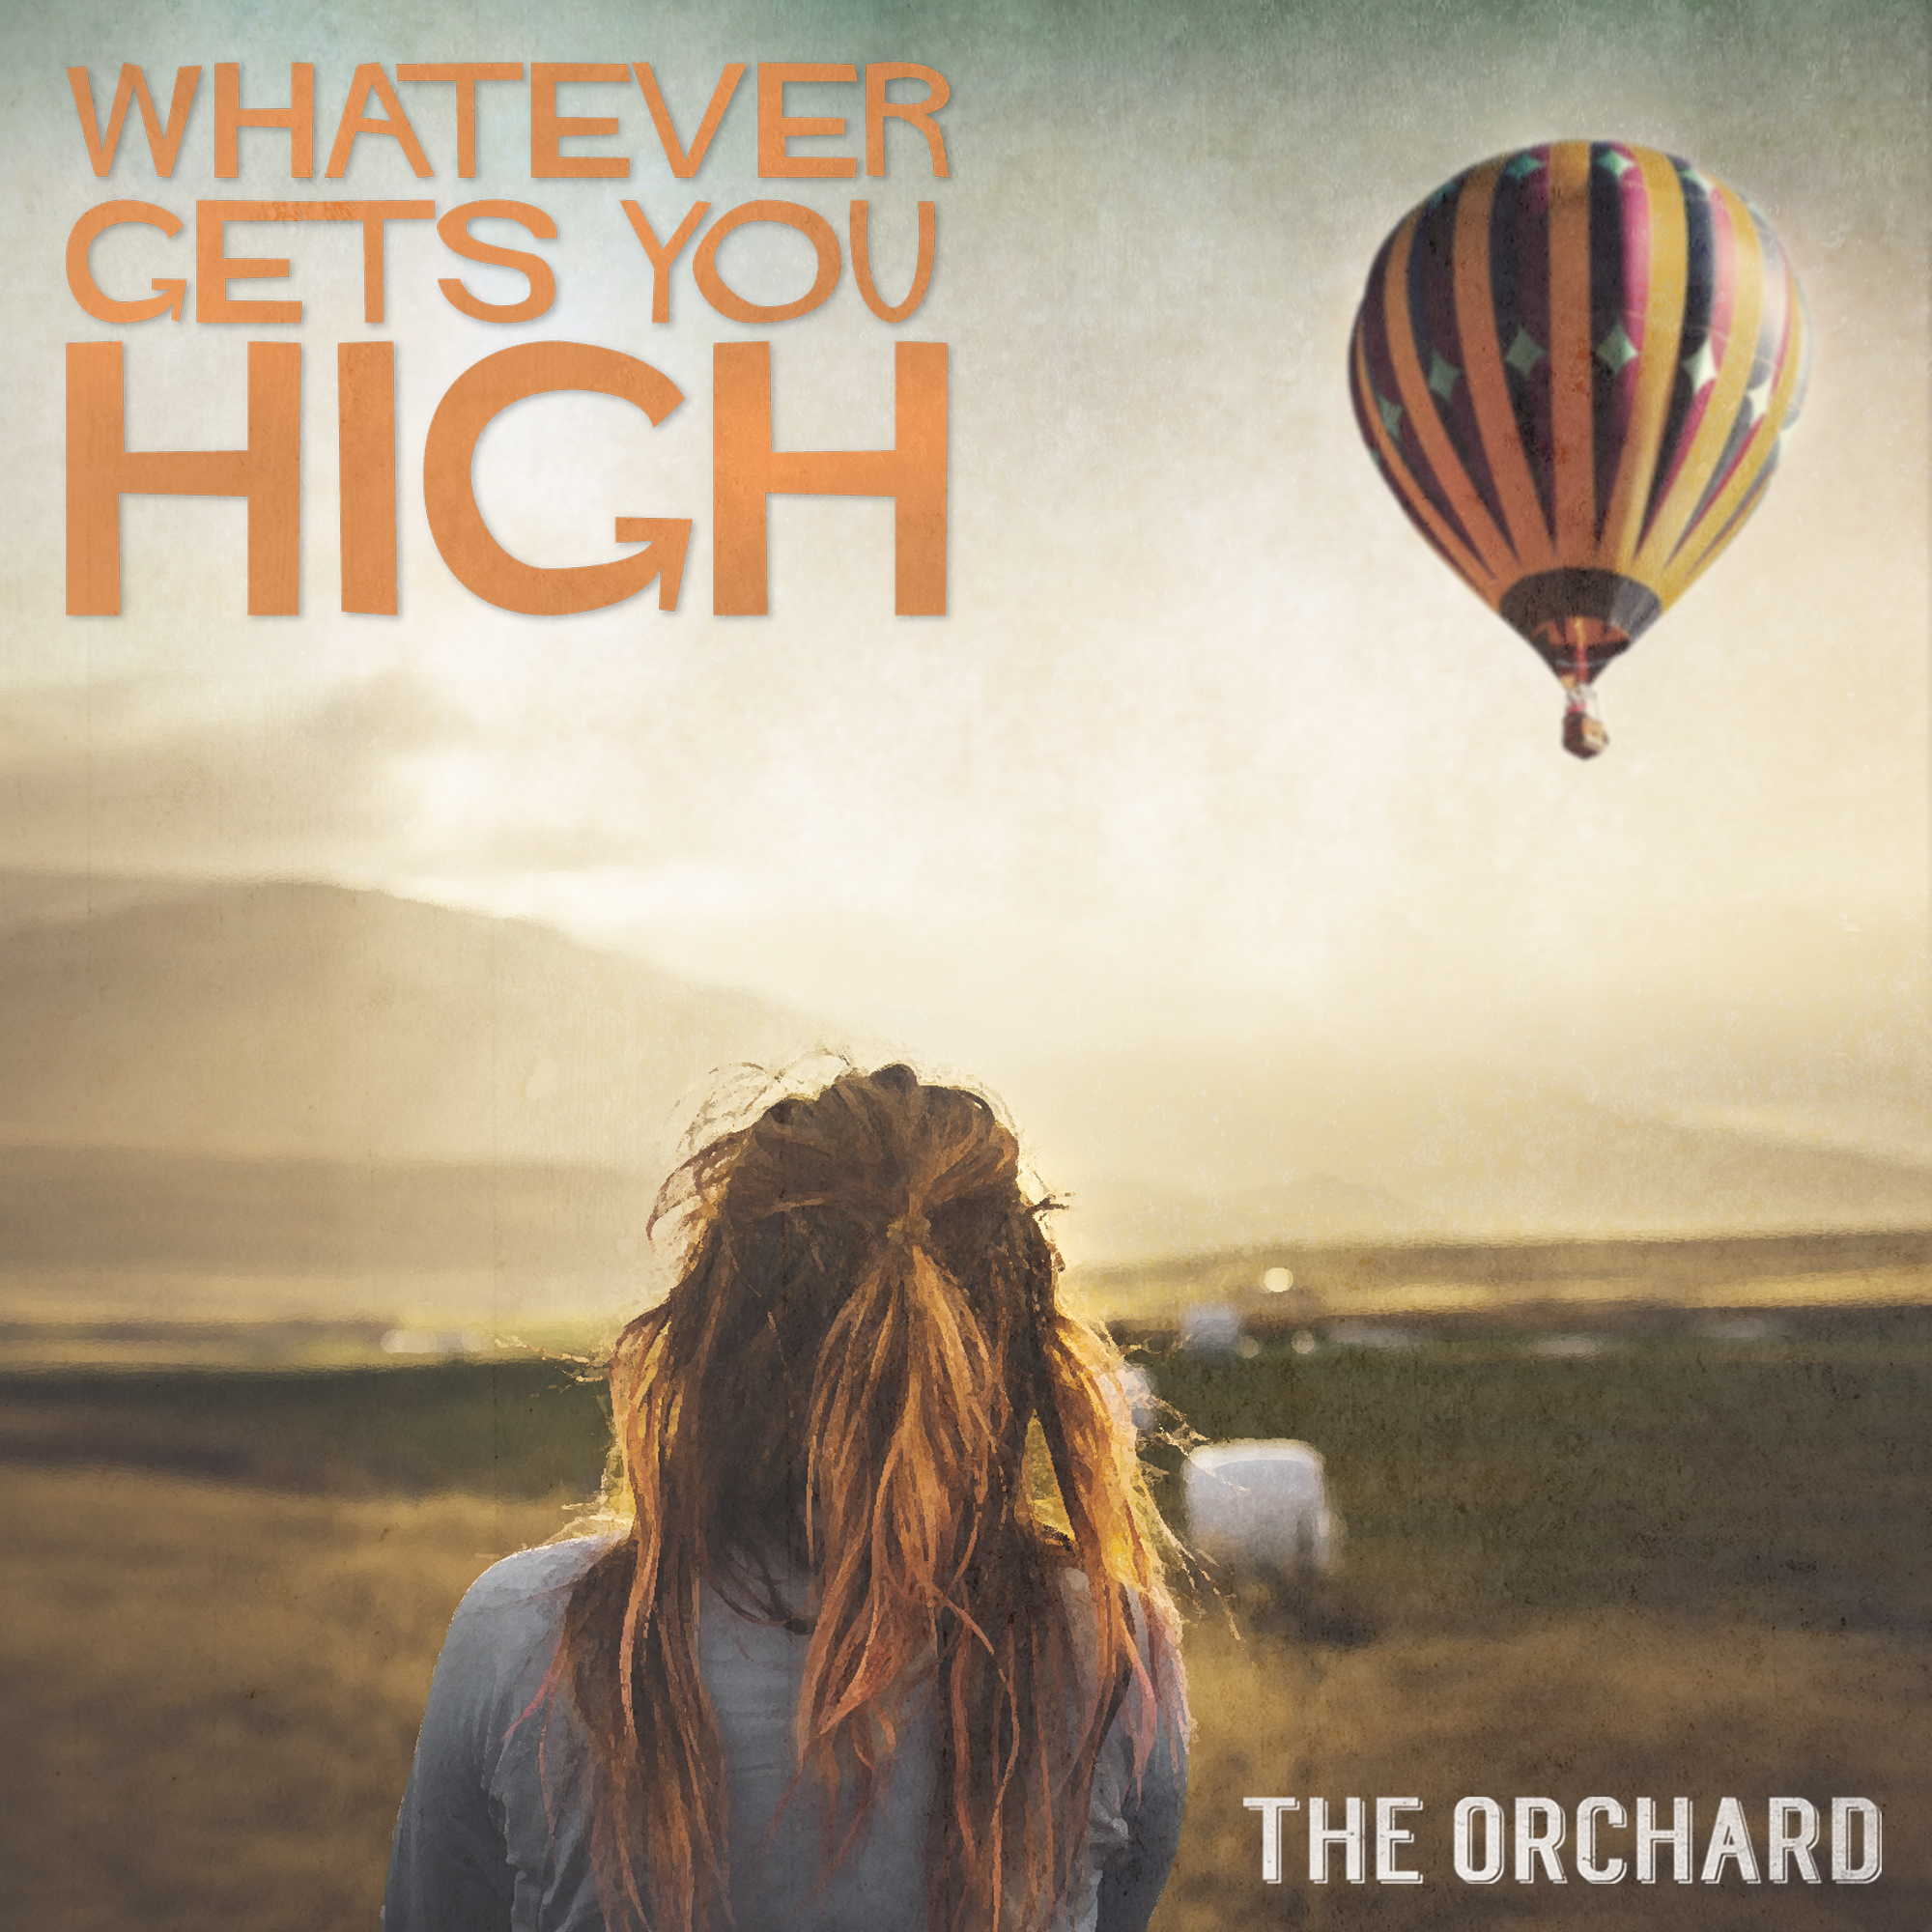 THE ORCHARD TO RELEASE NEW SINGLE “WHATEVER GETS YOU HIGH” APRIL 24